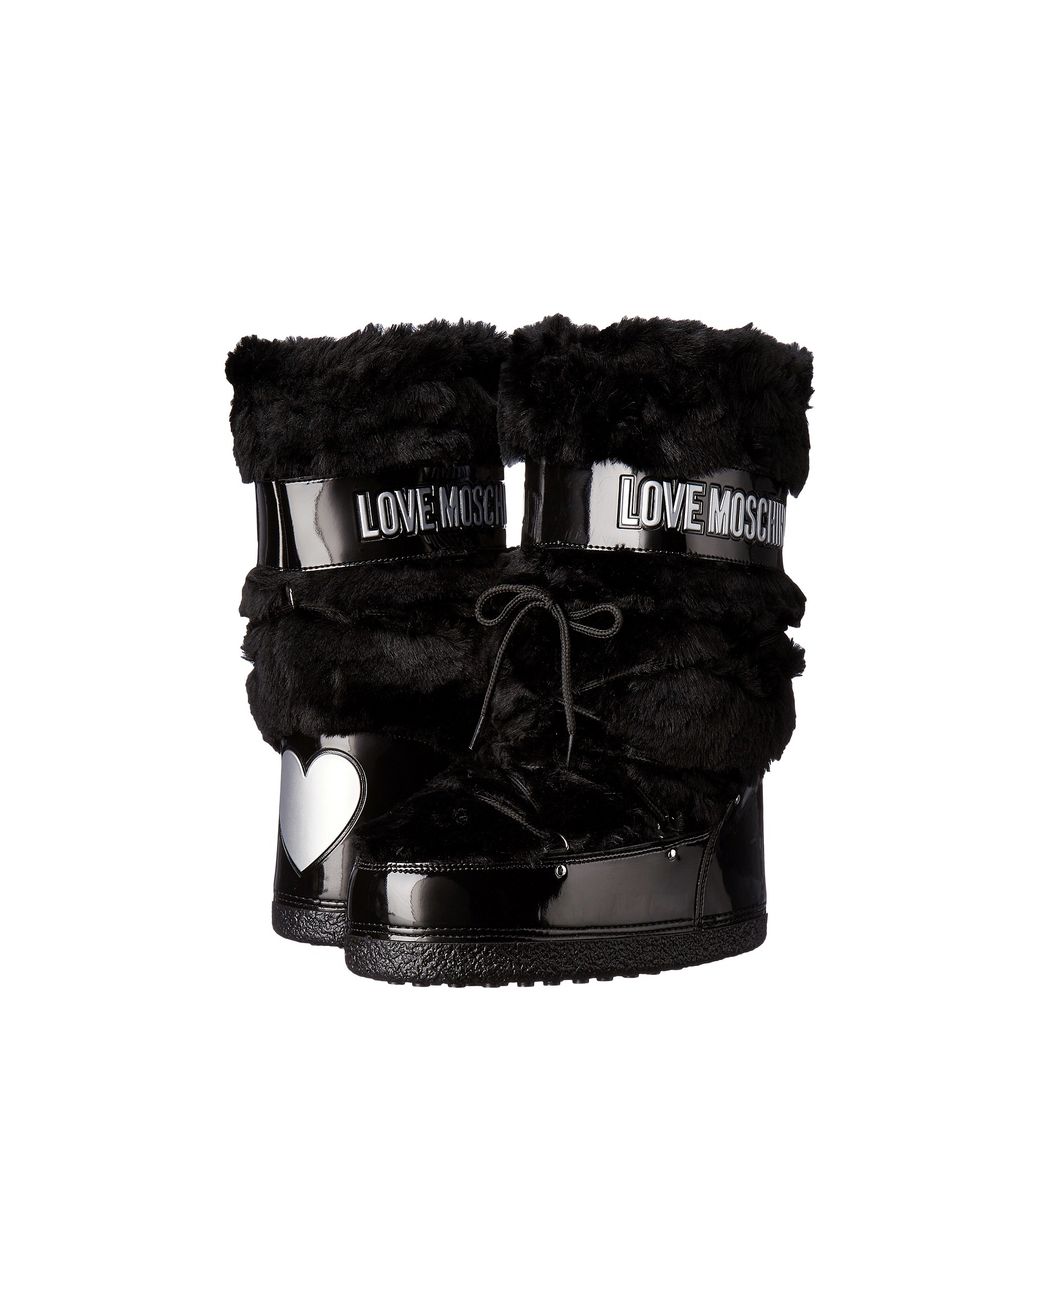 Love Moschino Faux-Fur Moon Boots in Black | Lyst